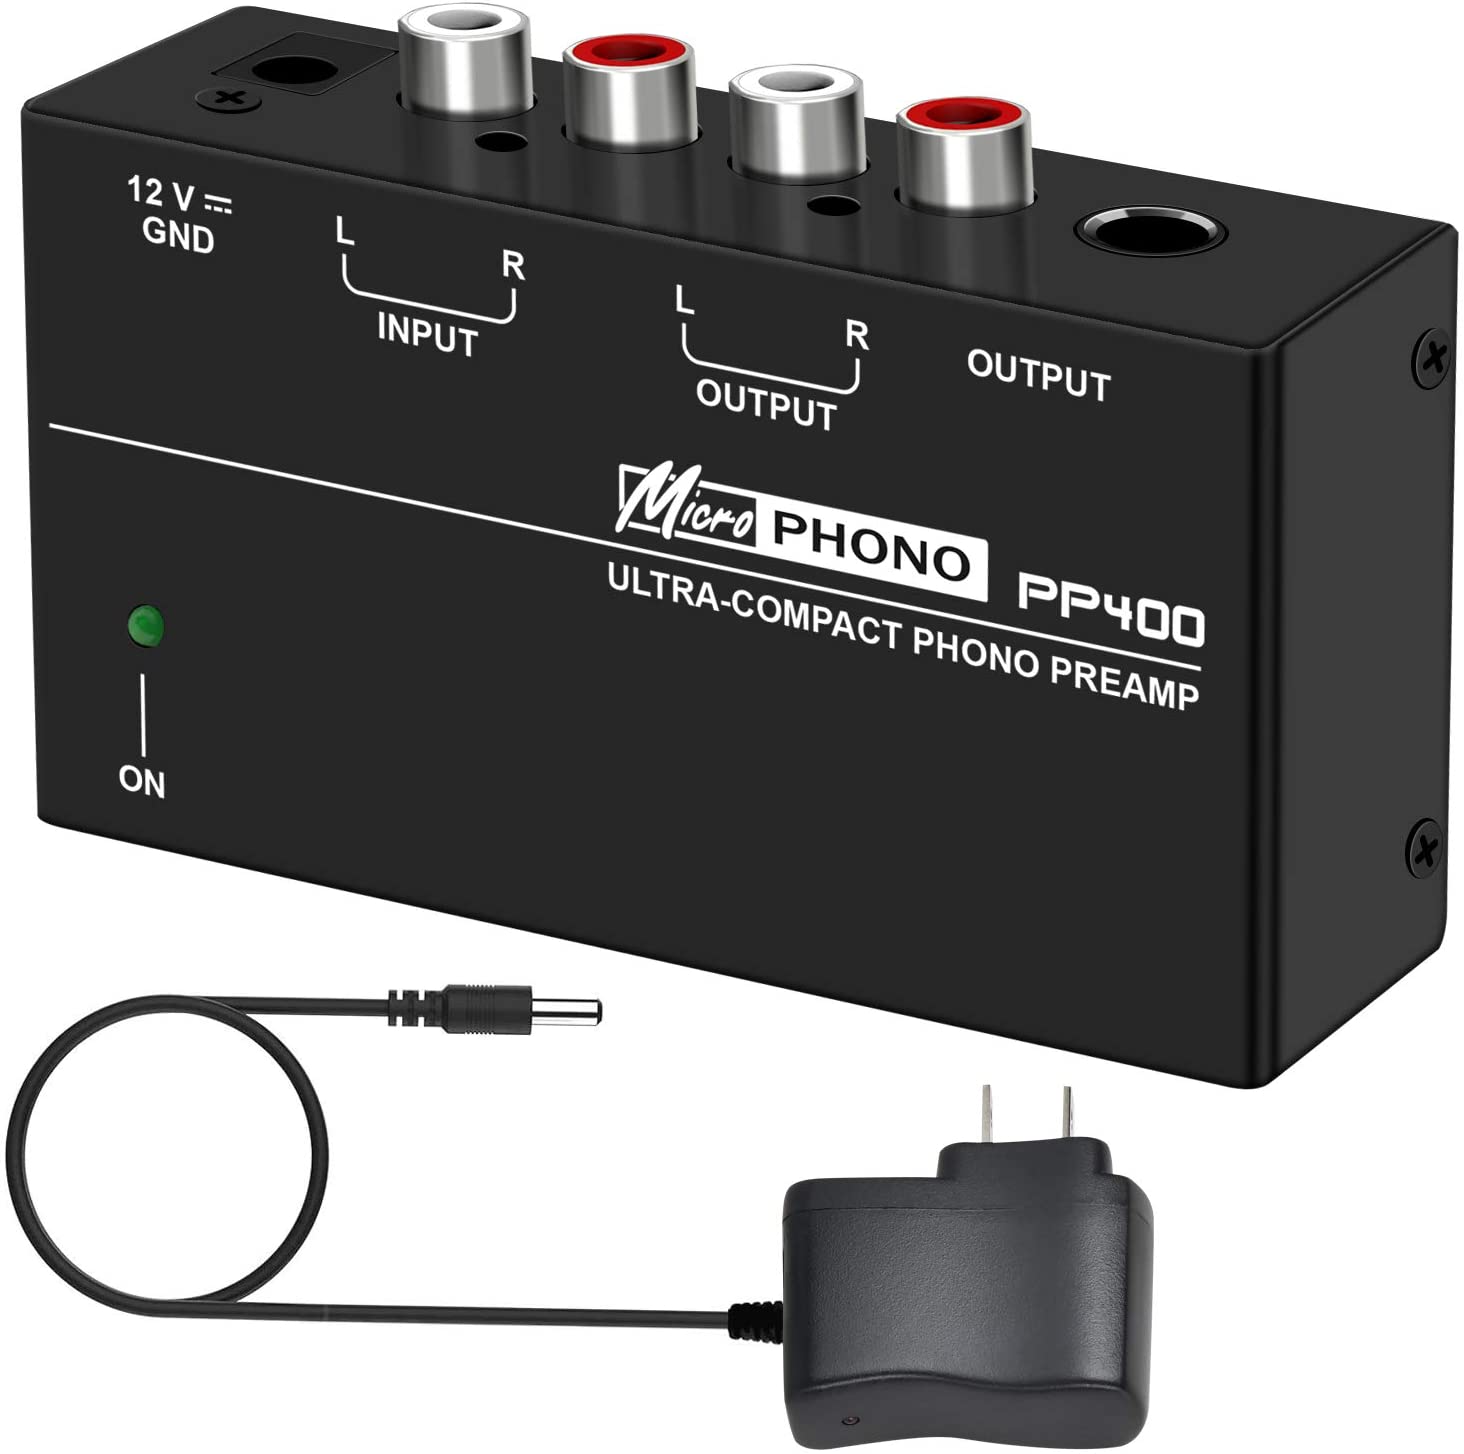 Rybozen Phono Turntable Preamp - Mini Electronic Audio Stereo Phonograph Preamplifier with RCA Input, RCA/TRS Output,Low Noise Operation,with 12 Volt DC Adapter (PP400)